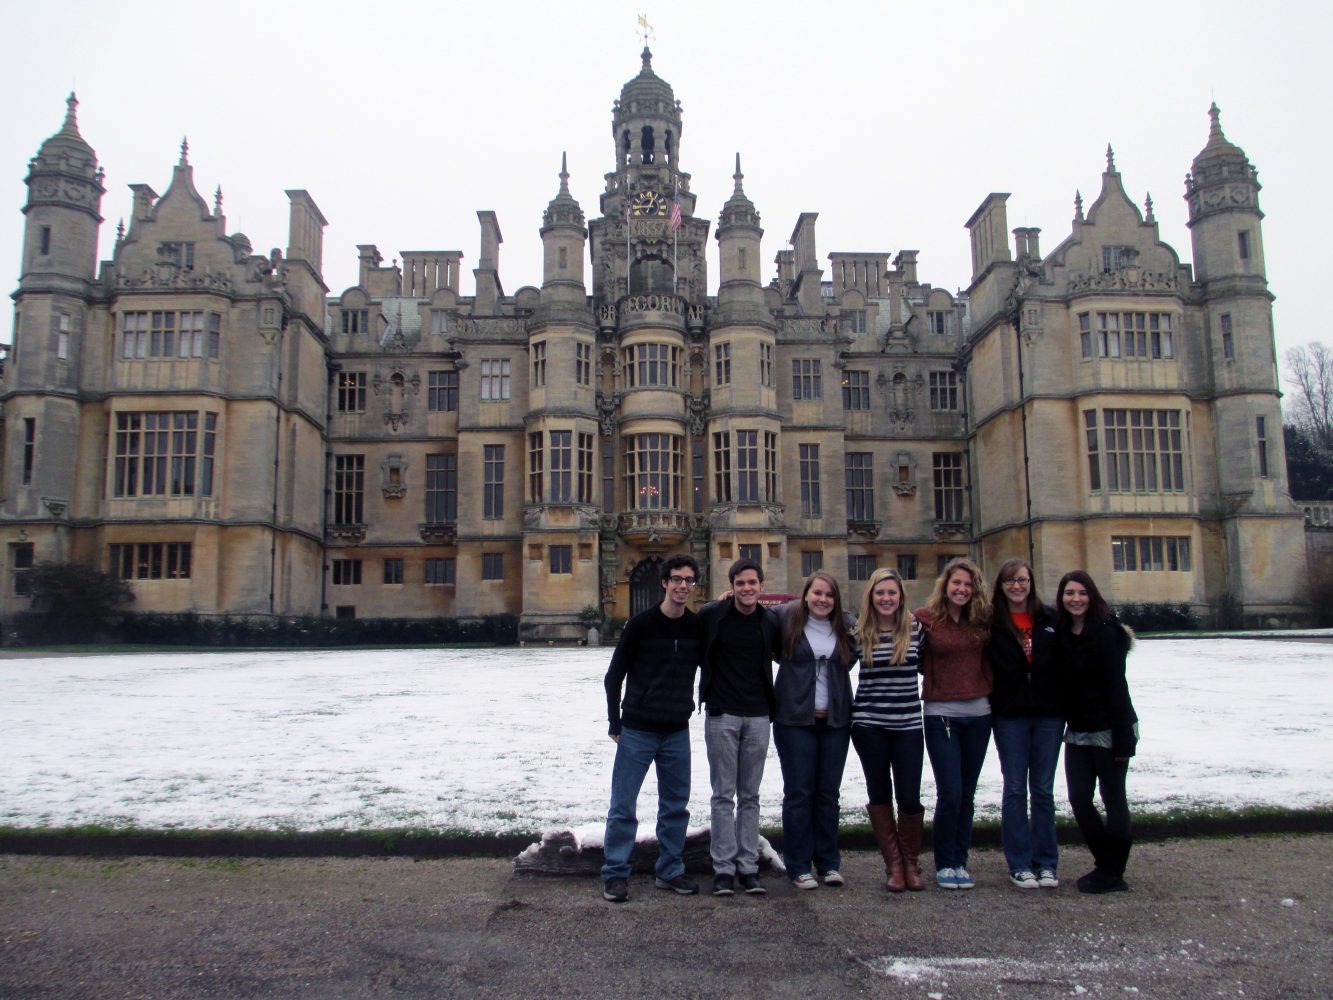 Harlaxton thrives on the little things